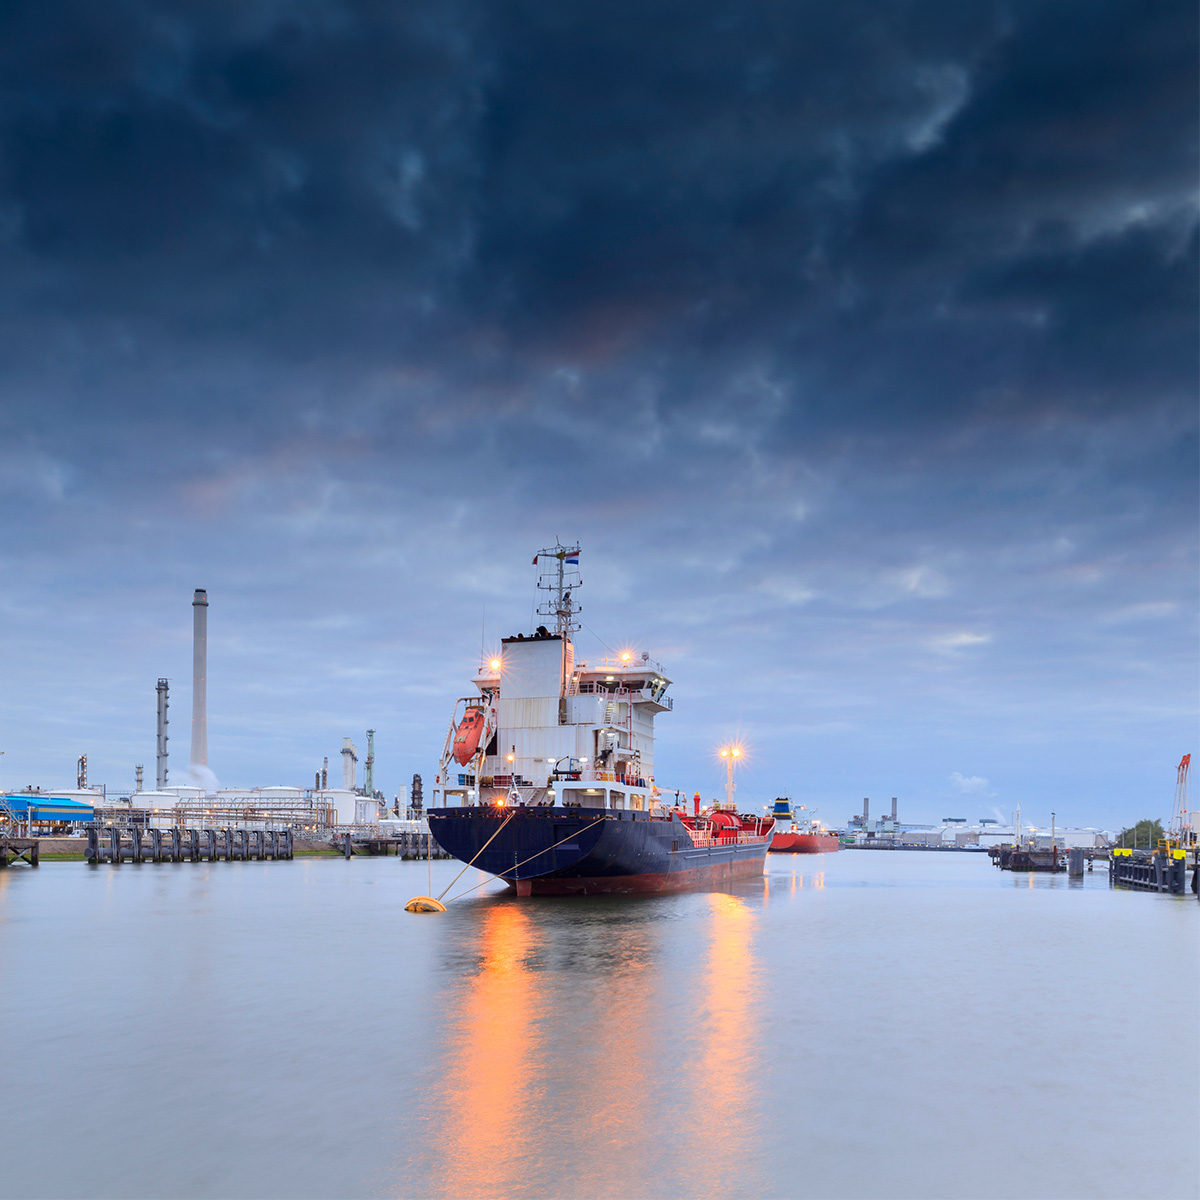 Industrial ship in the Port of Rotterdam